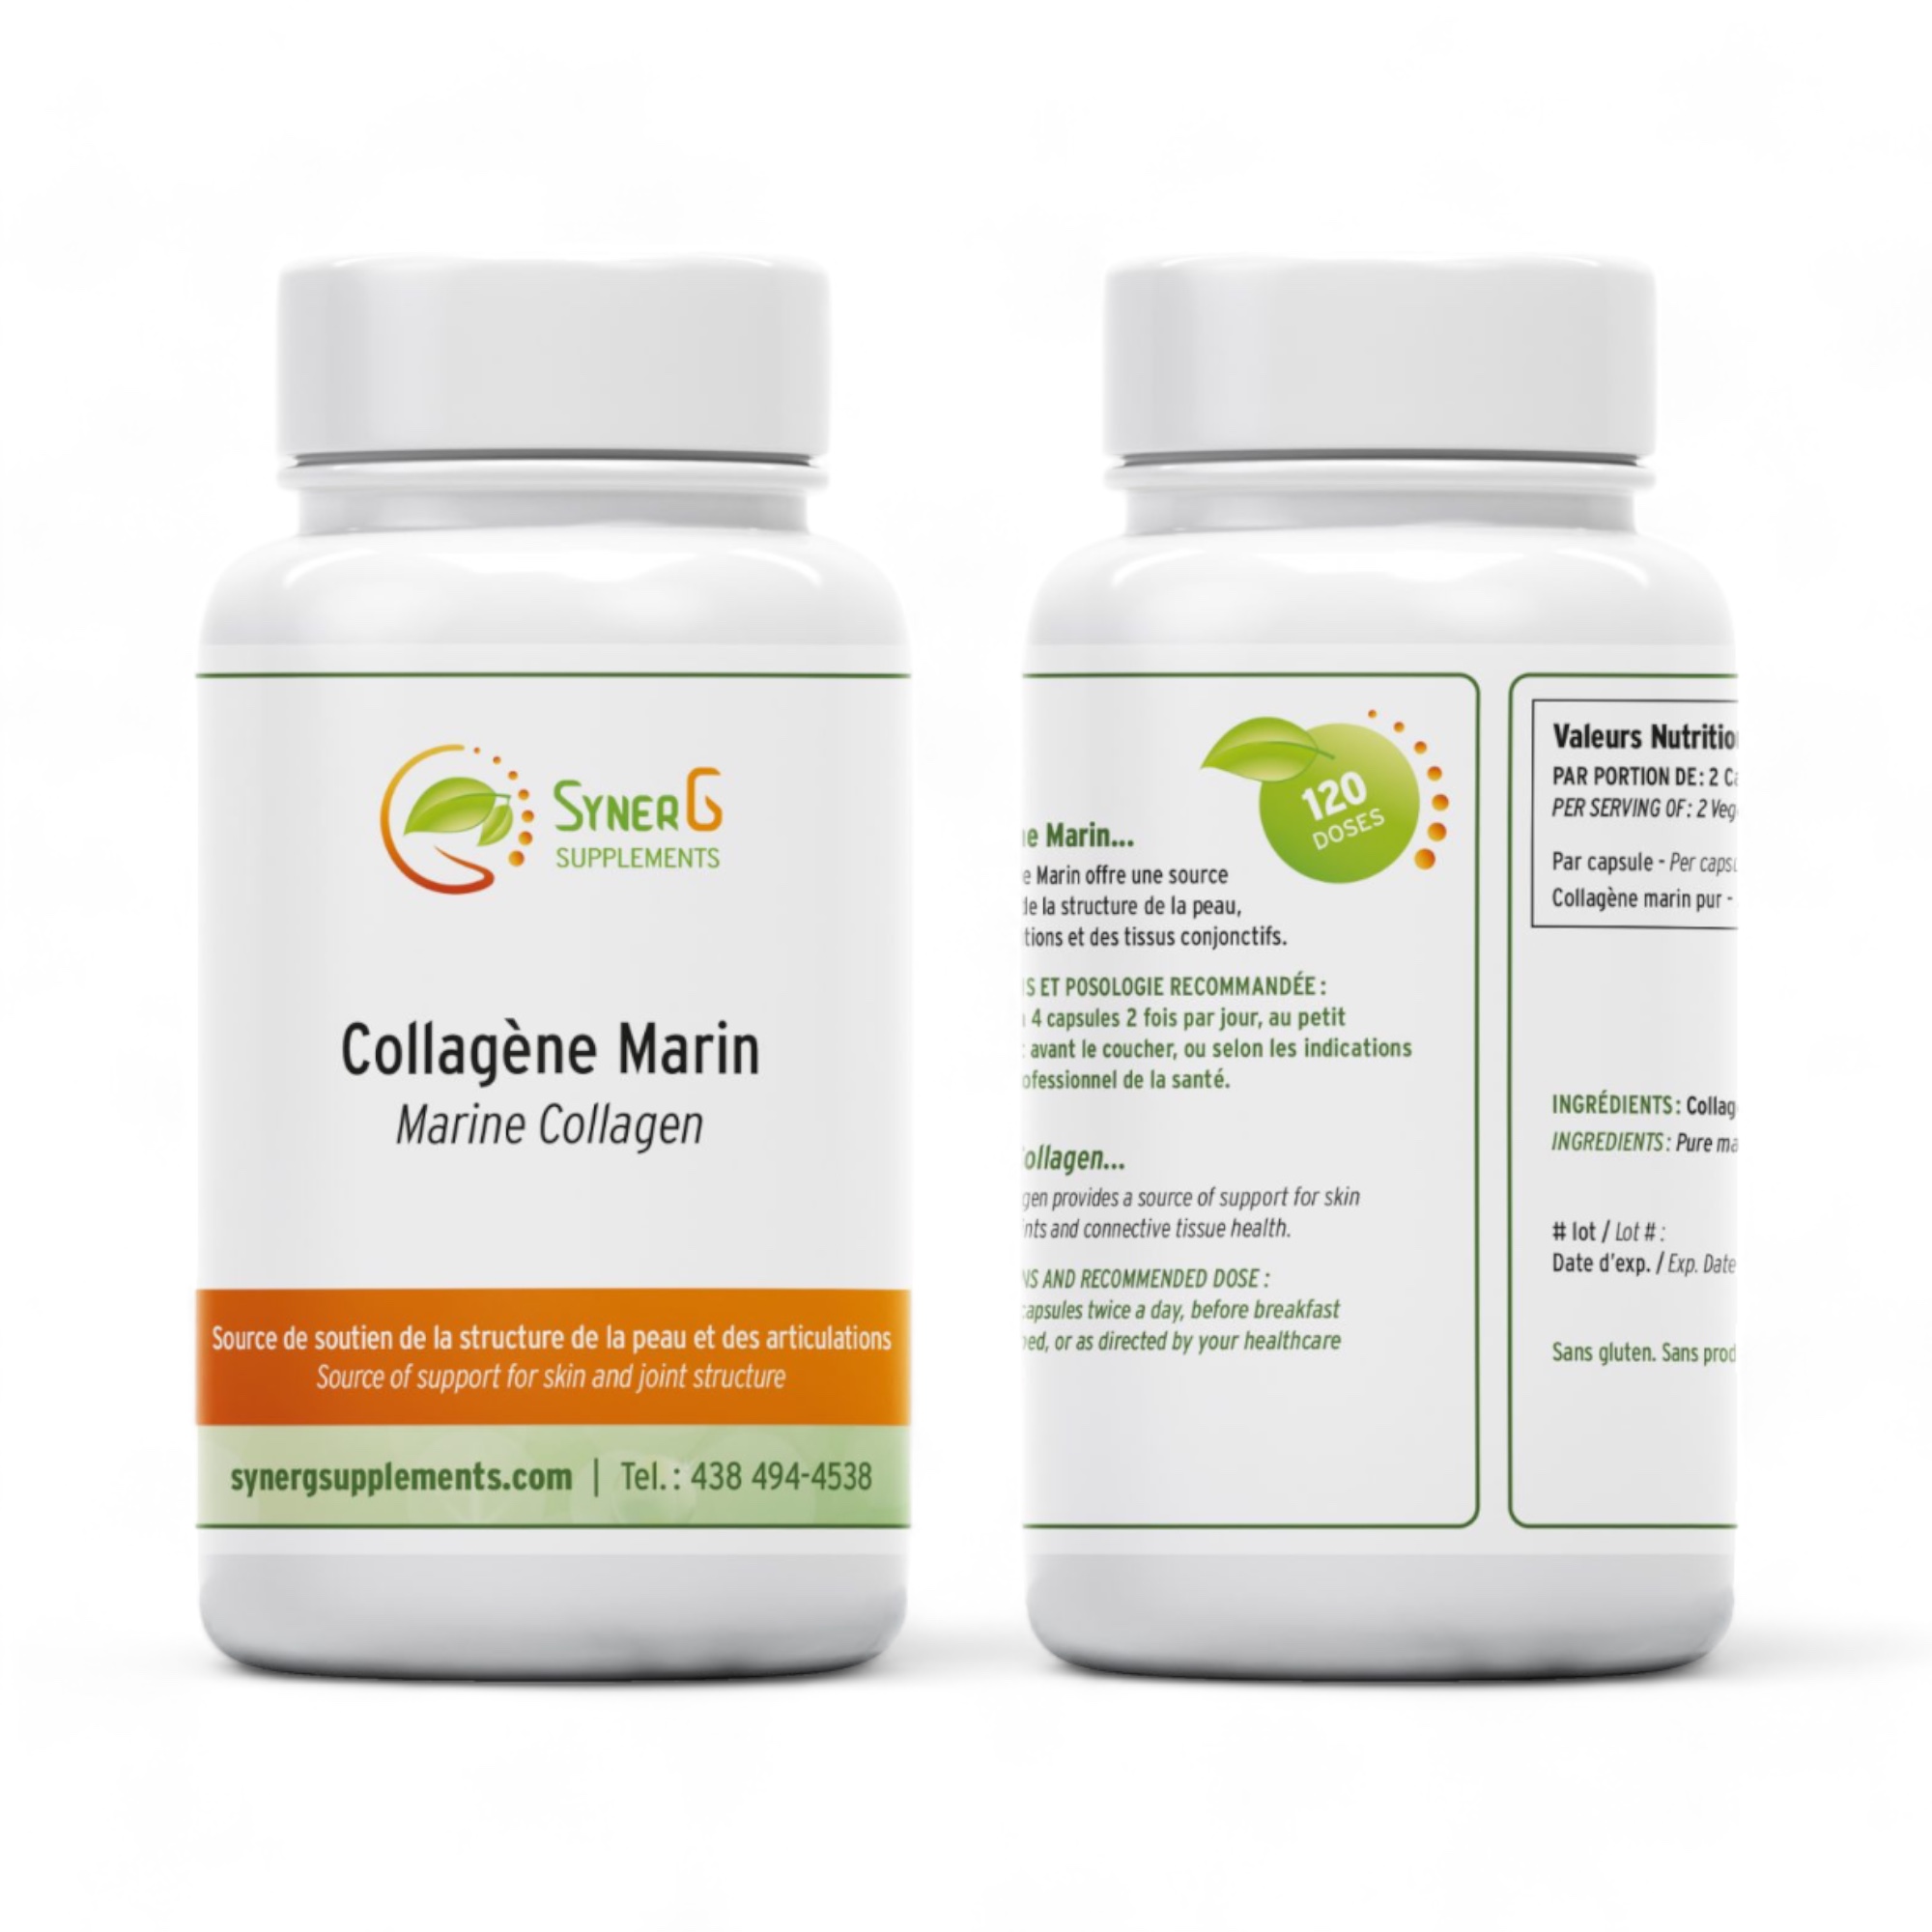 Collagène Marin 120 capsules Syner G Suppléments